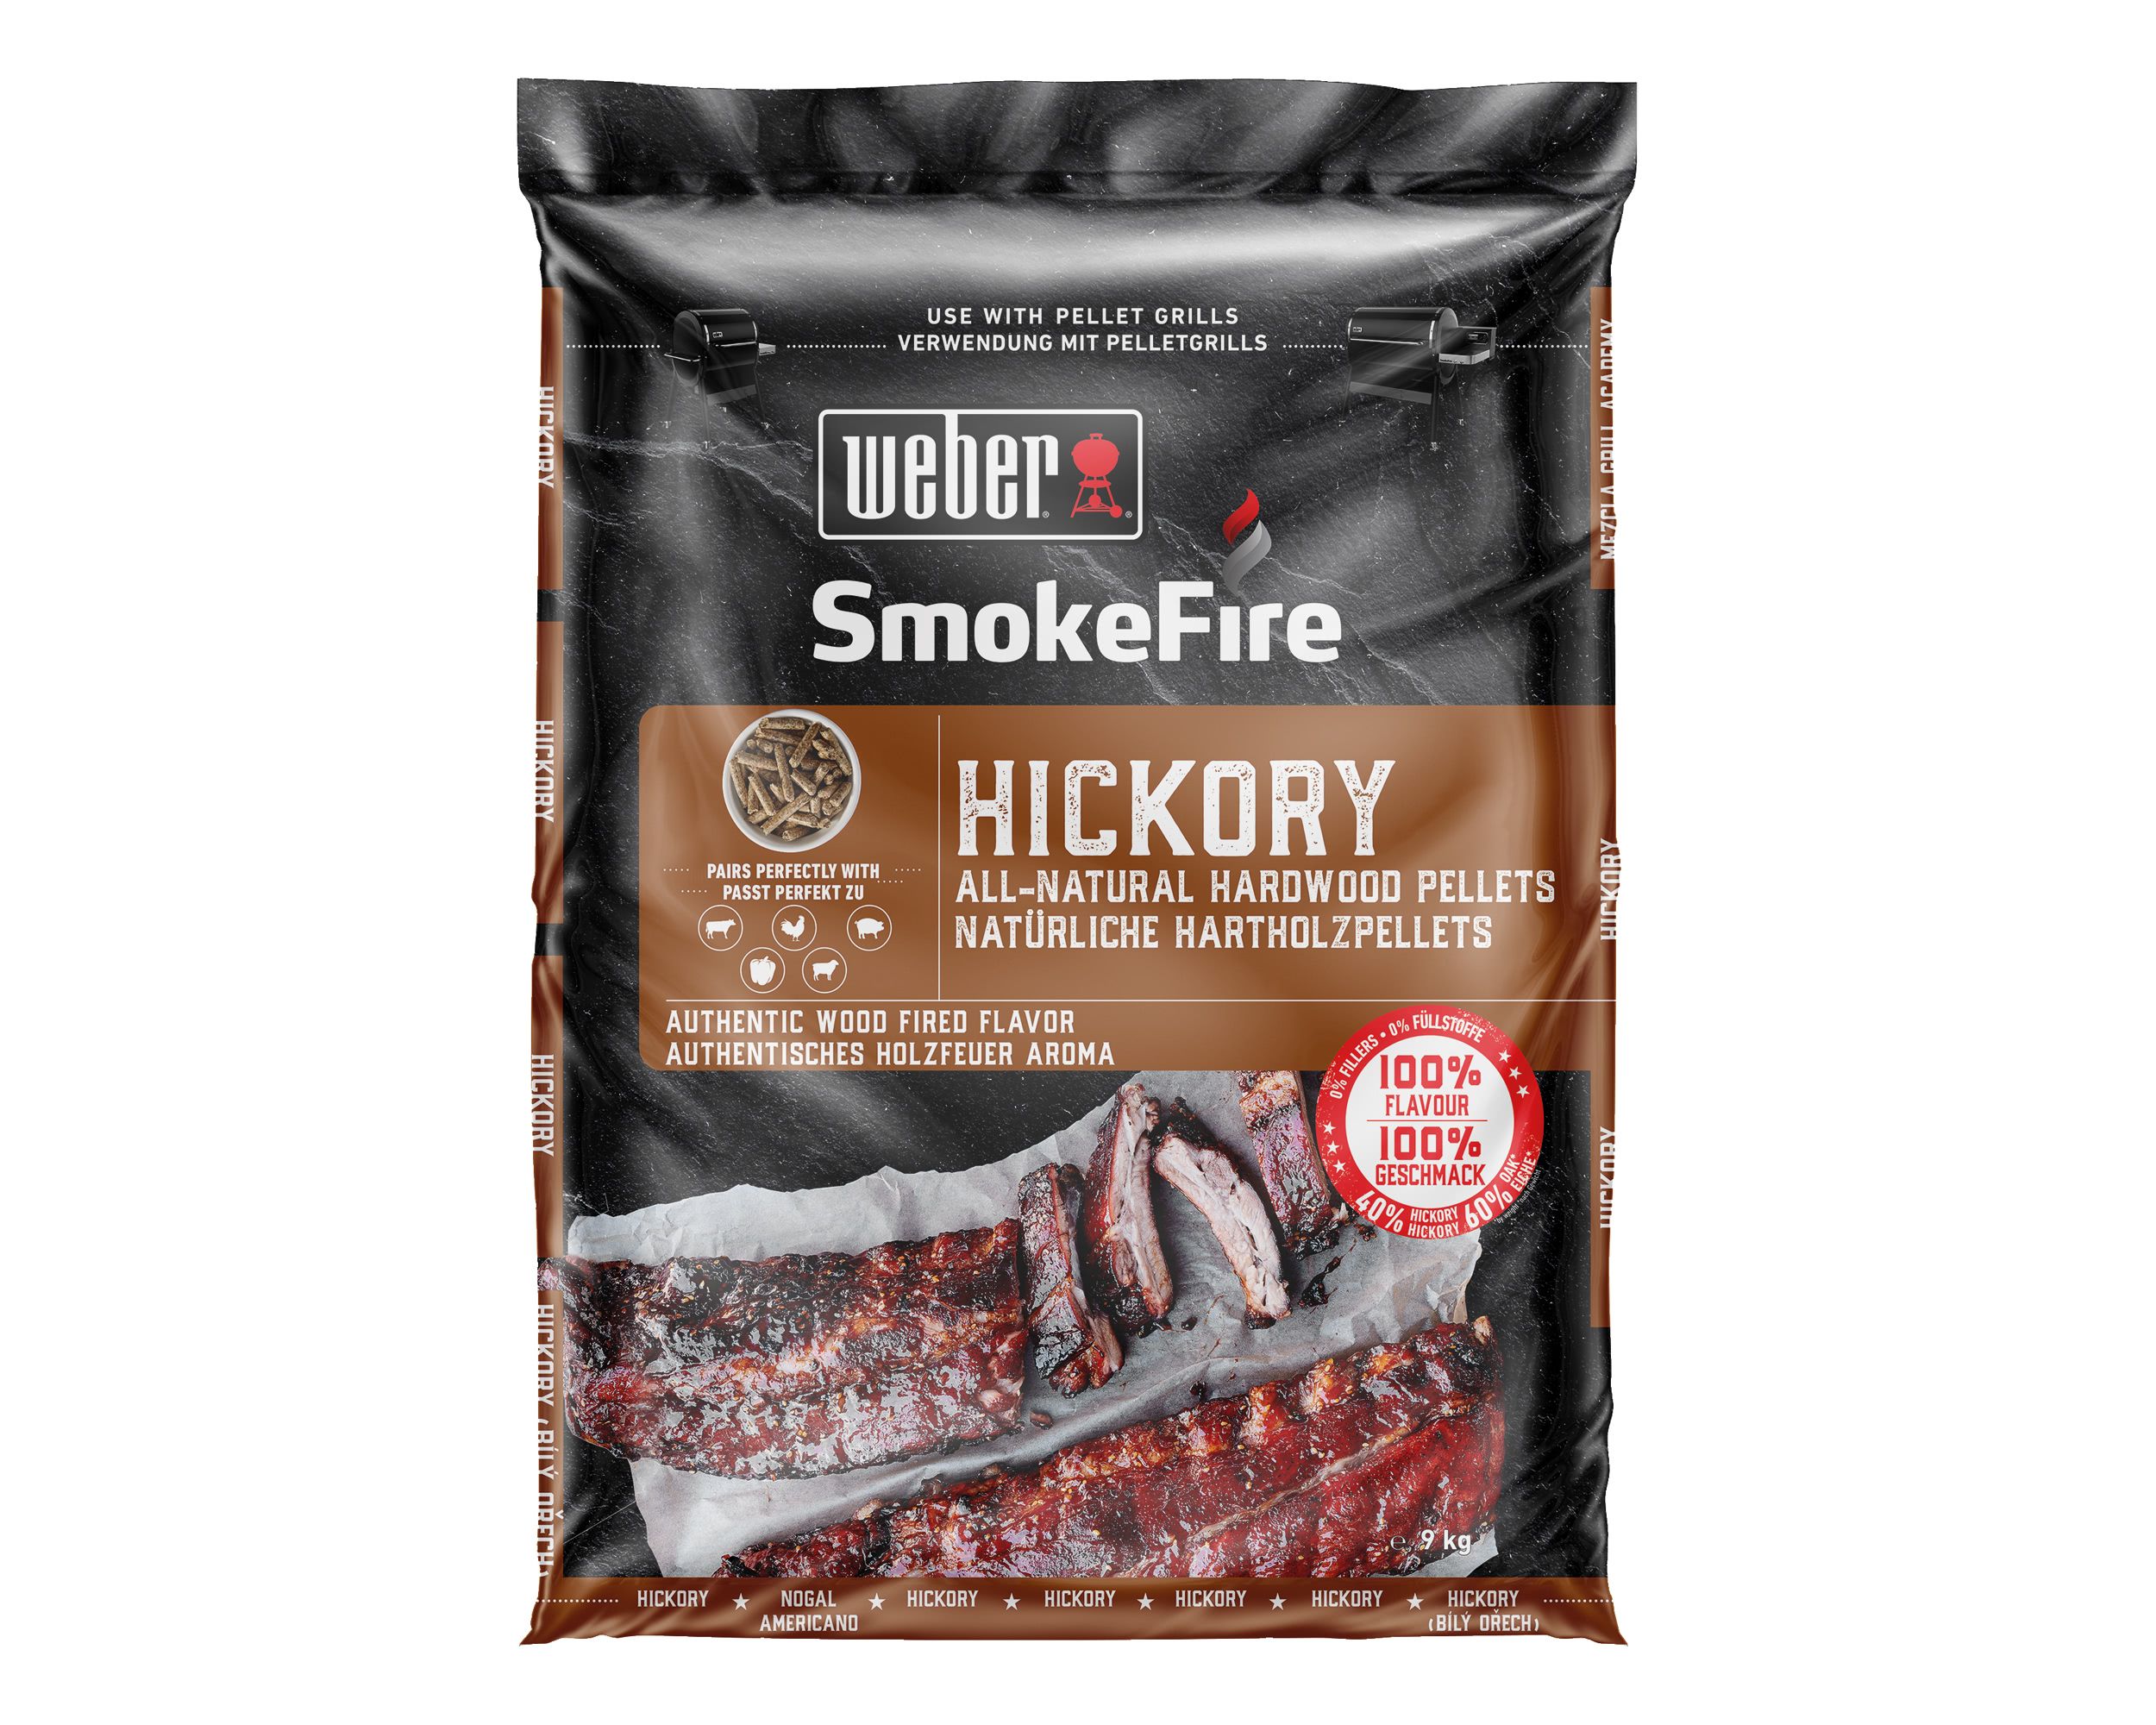 Holzpellets for SmokeFire Hickory